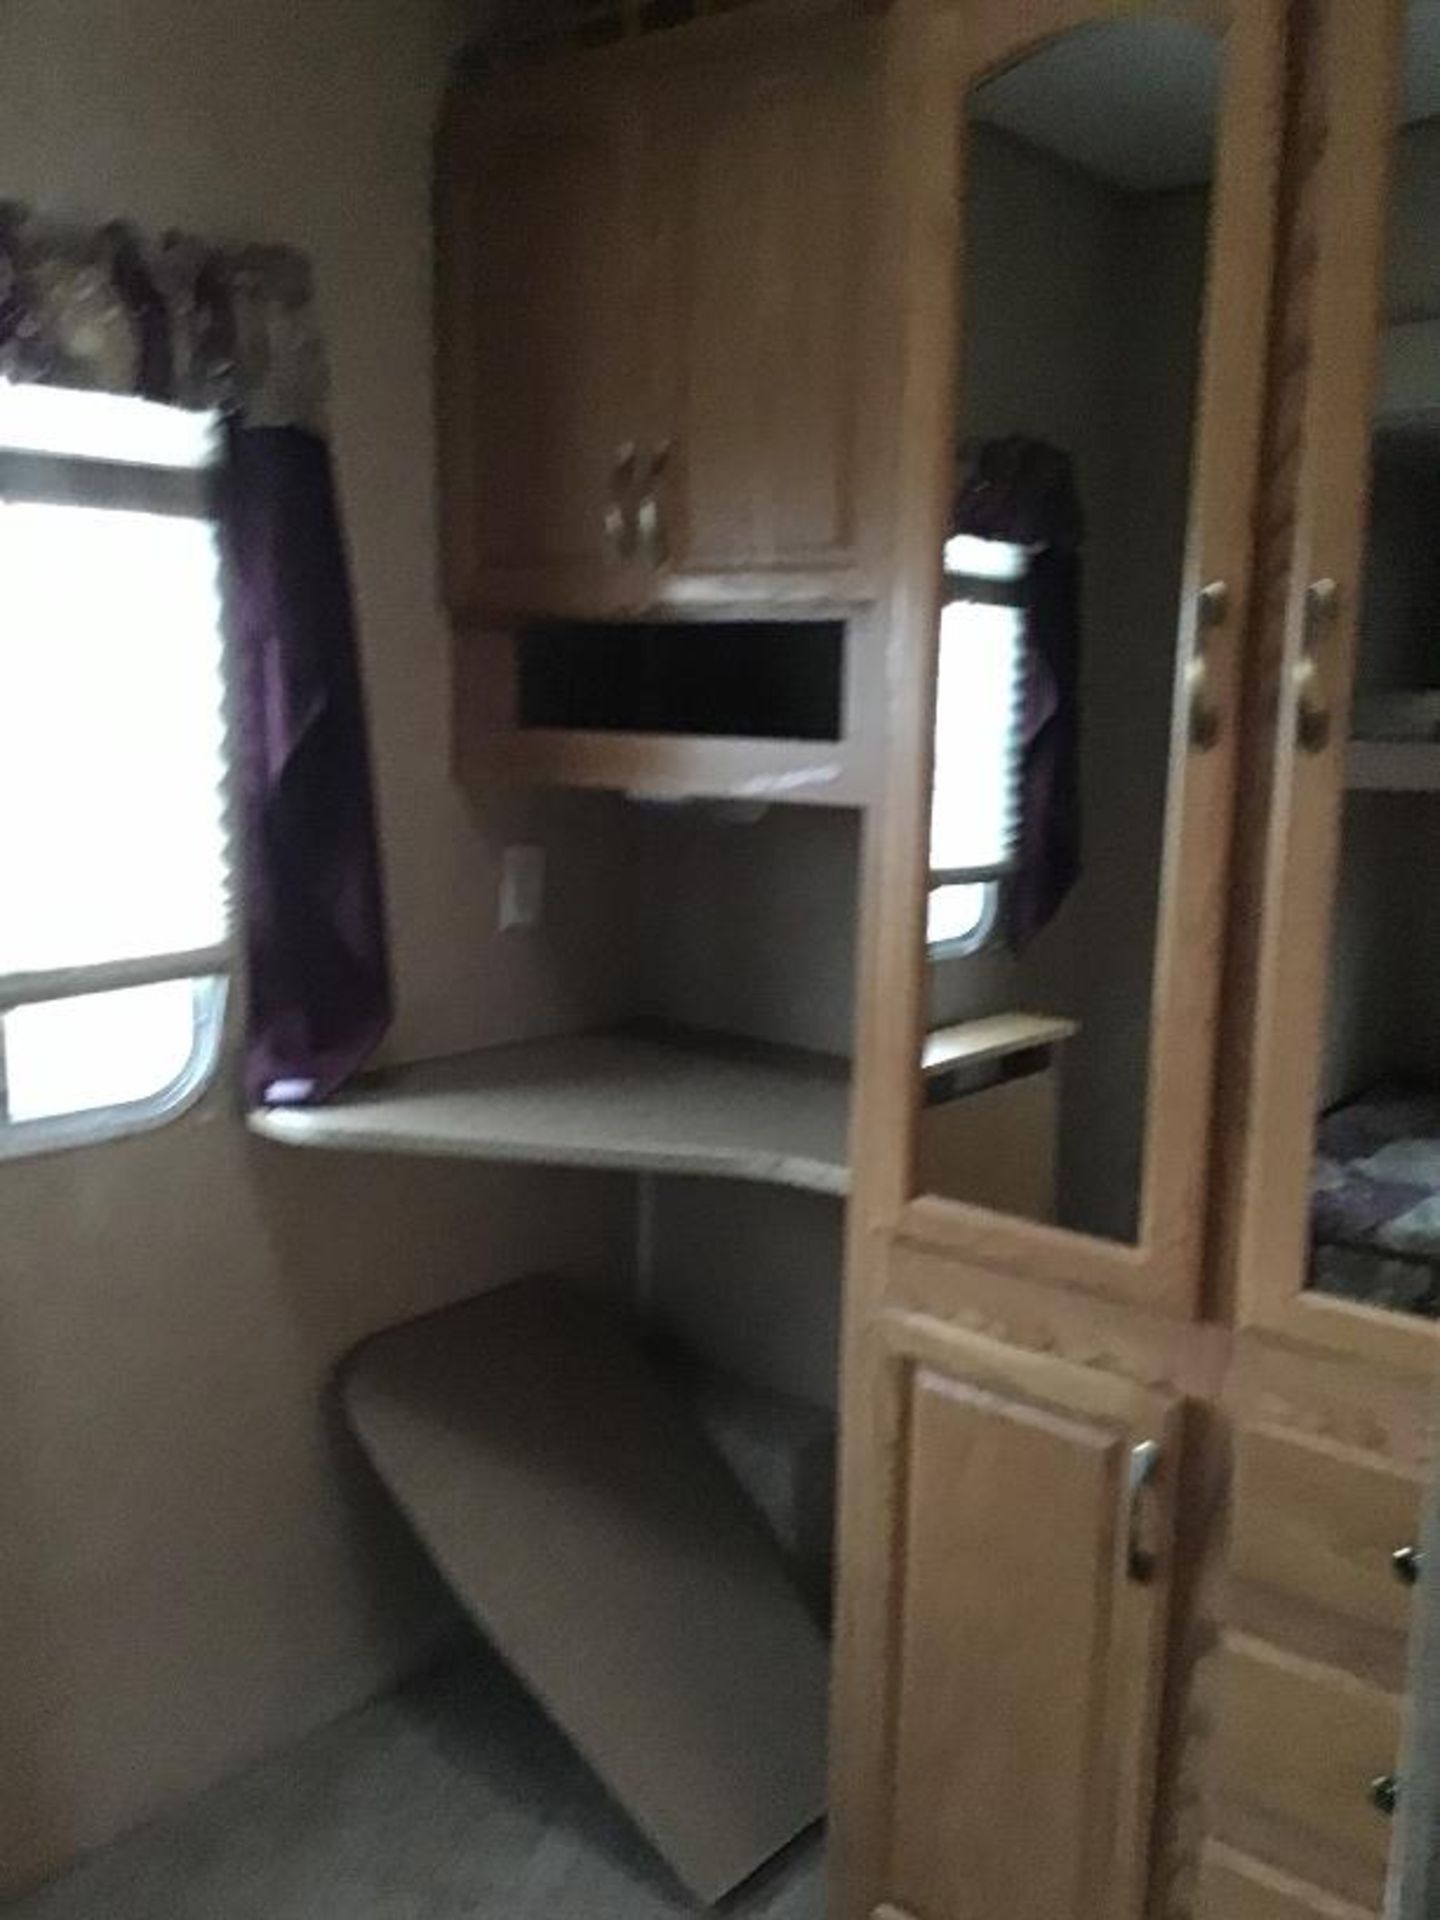 2007 Sandpiper F315 by Forest River 5th Wheel Holiday Trailer - Image 19 of 29